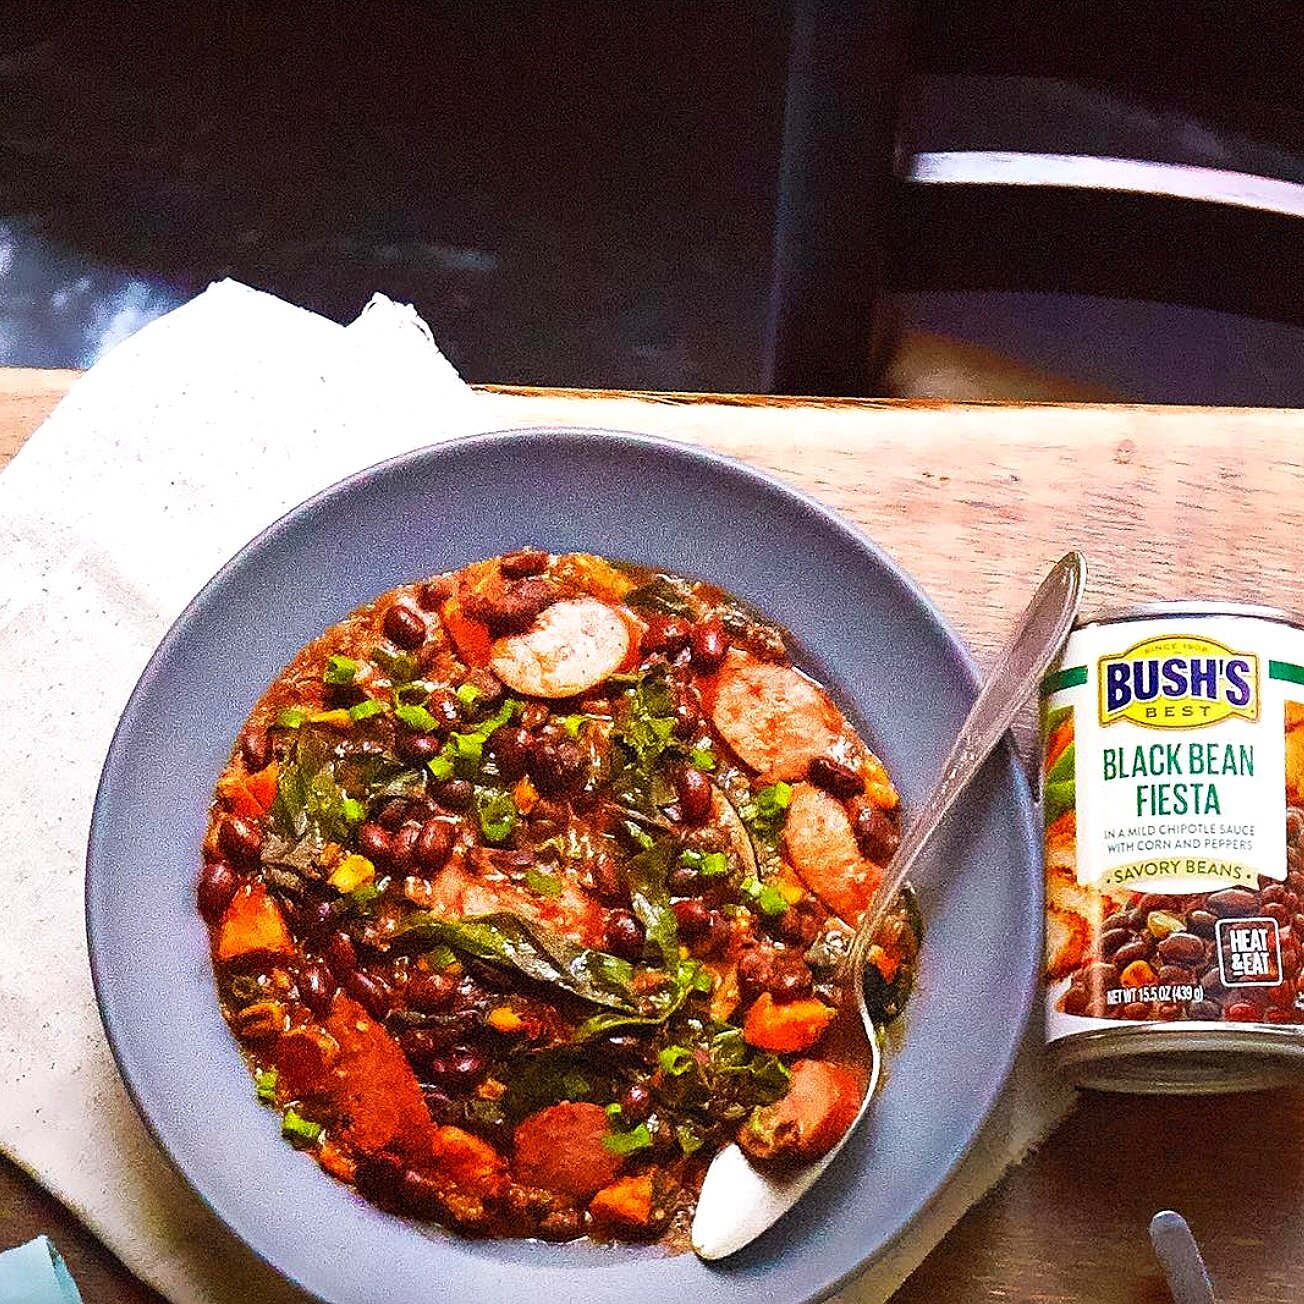 One can of black bean fiesta gives this stew complexity (but keeps your shopping list short). Recipe below.